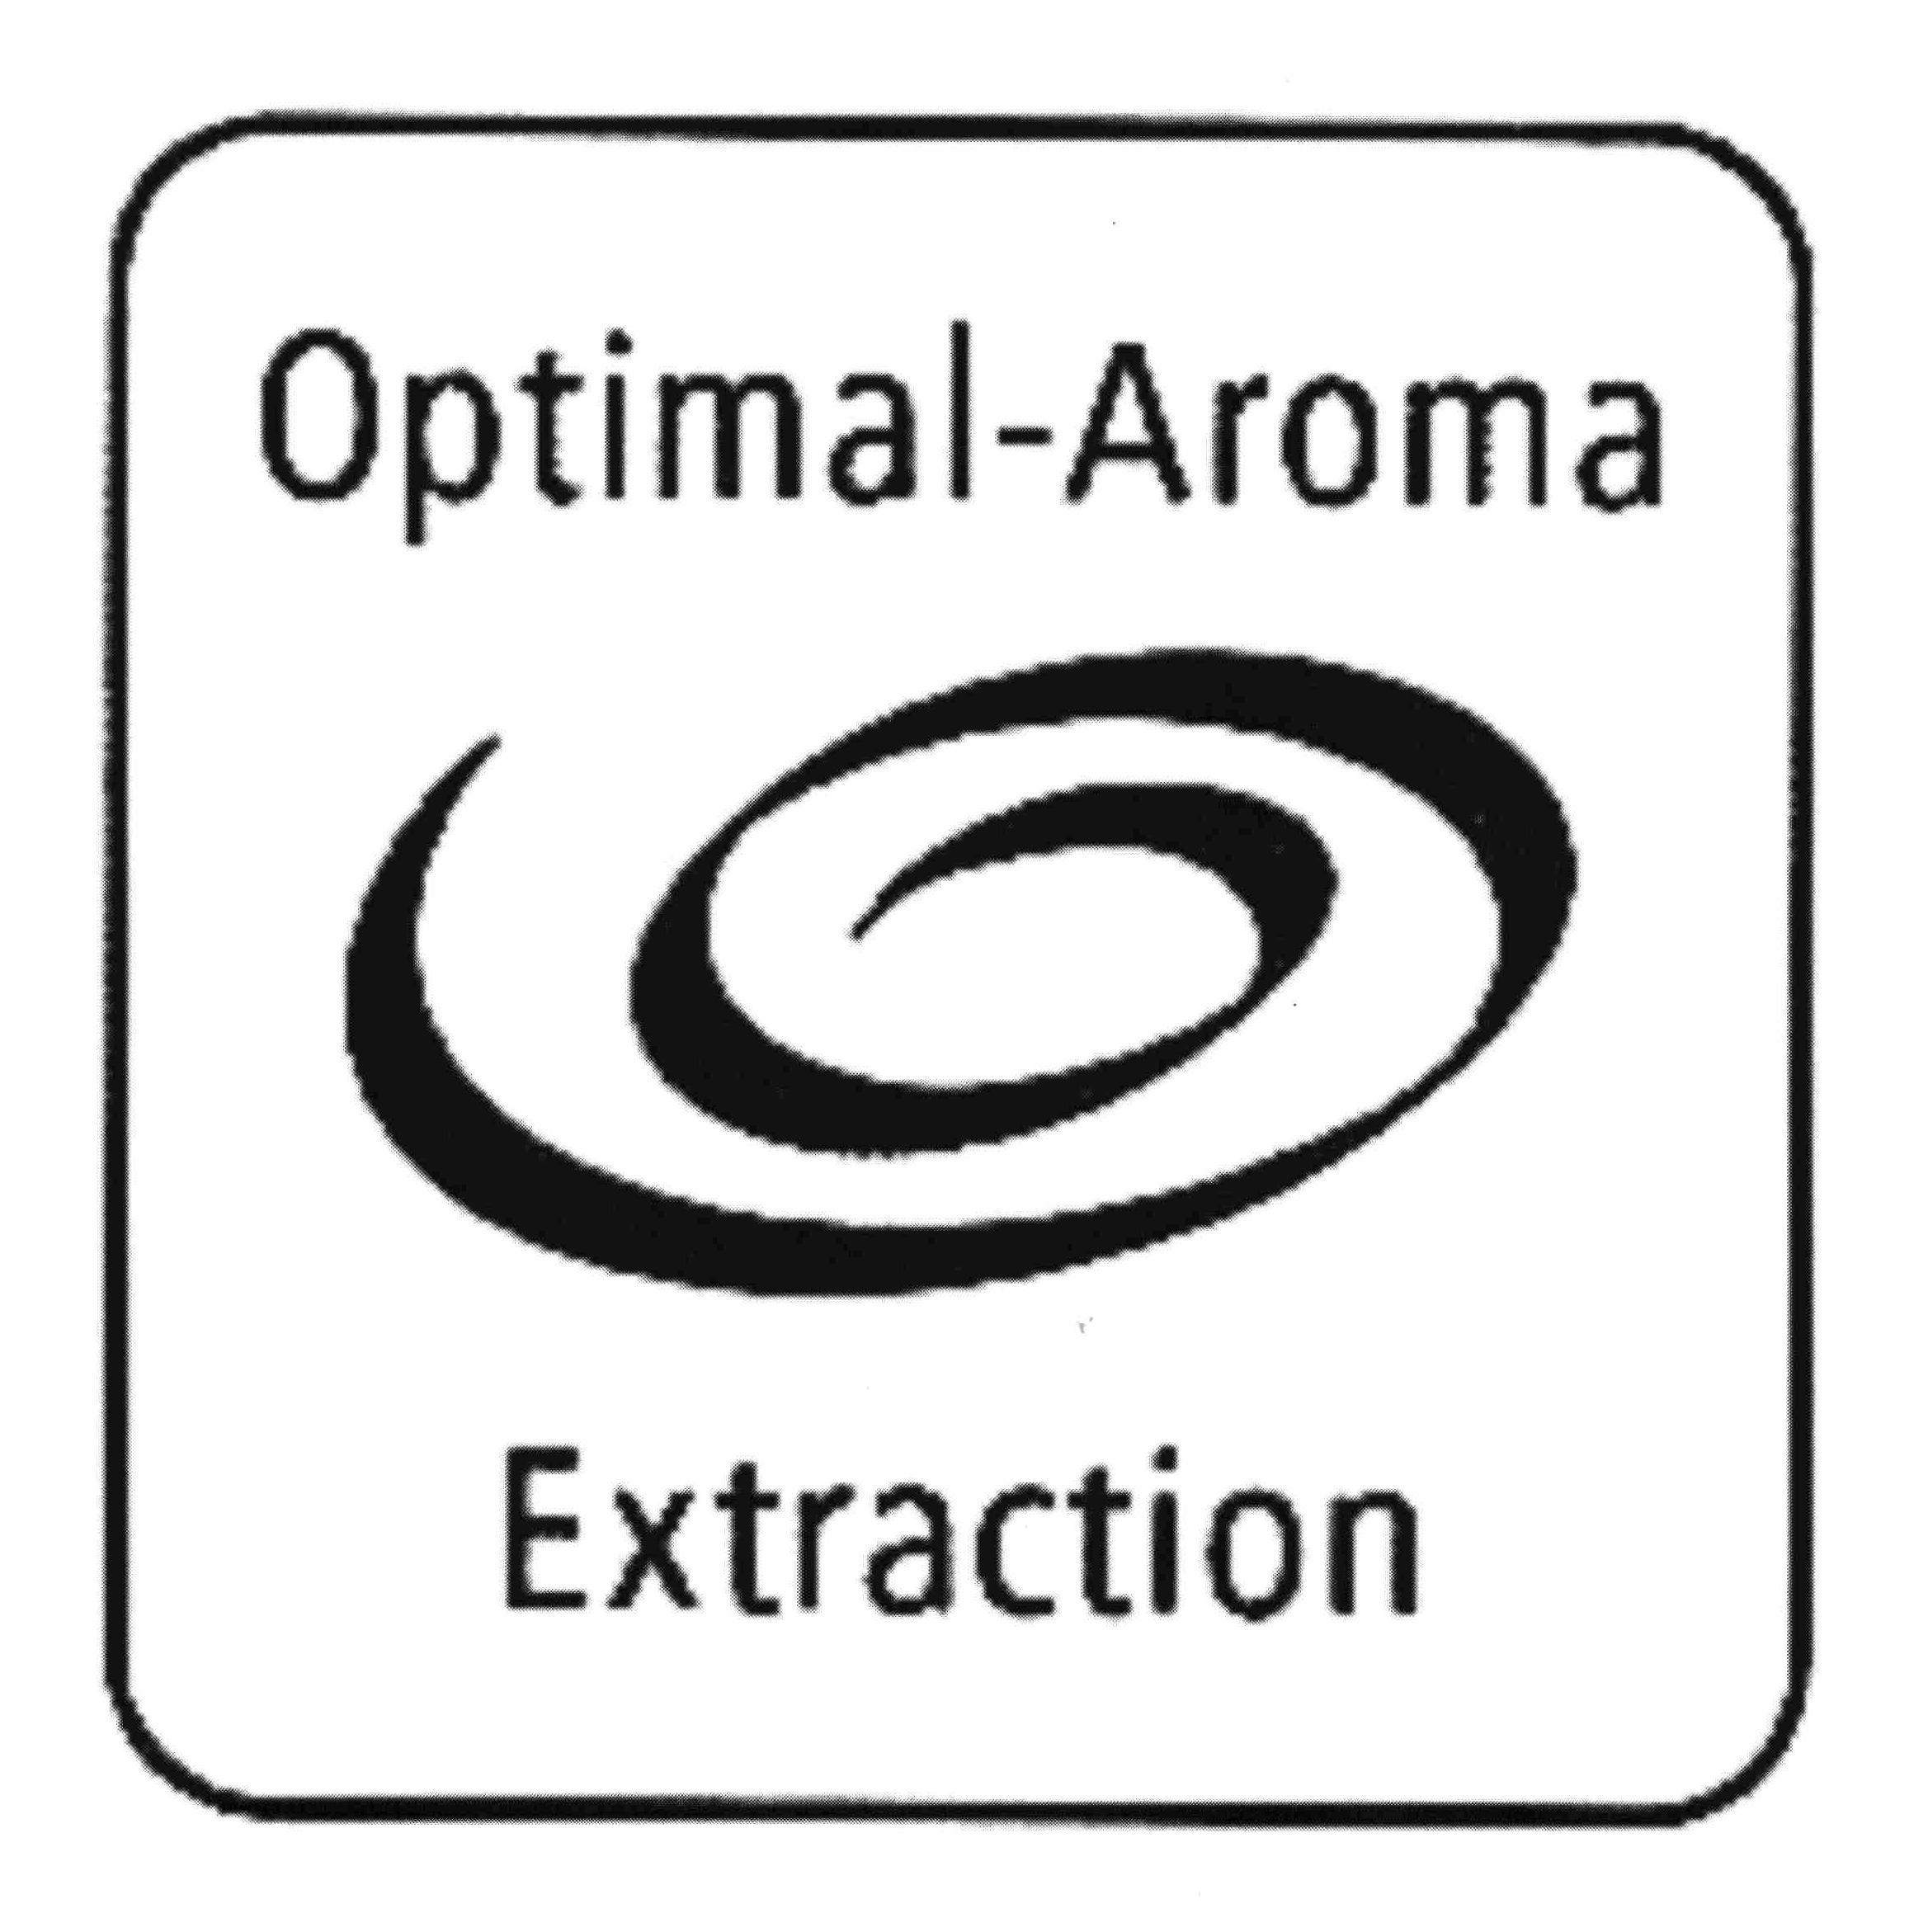  OPTIMAL-AROMA EXTRACTION